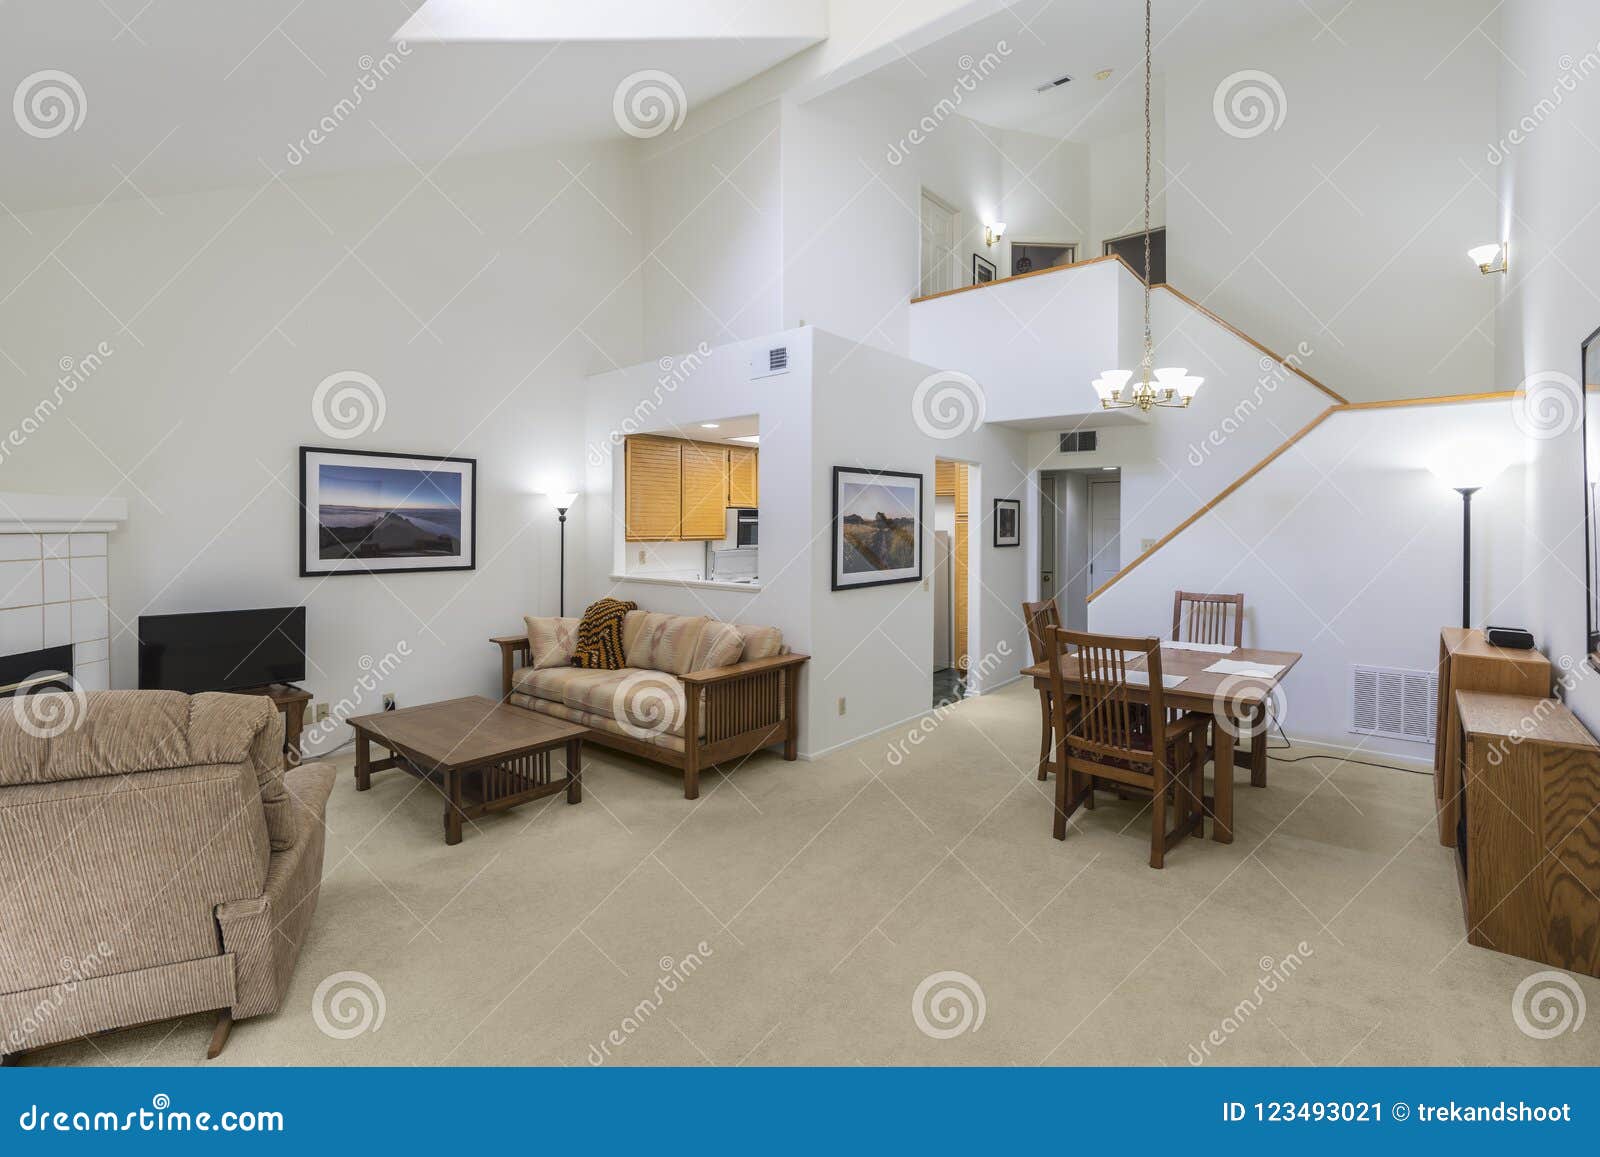 High Ceiling Condo Living Room Editorial Photo Image Of